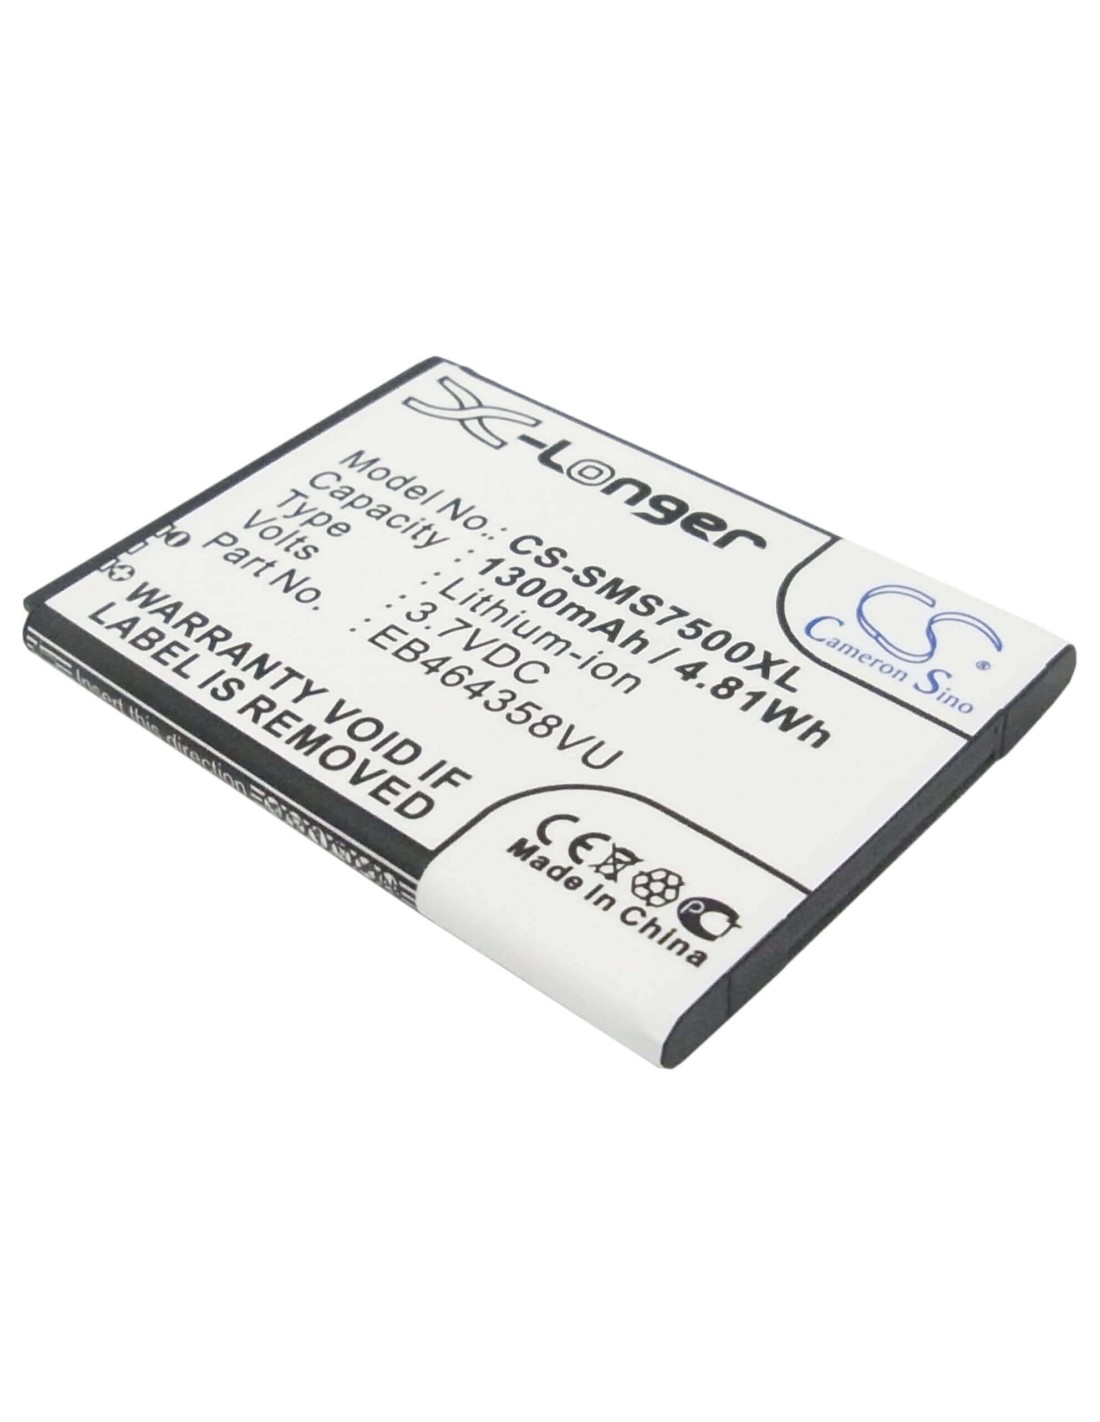 Battery for Samsung GT-S7500, Galaxy Ace Plus, GT-S6500 3.7V, 1300mAh - 4.81Wh